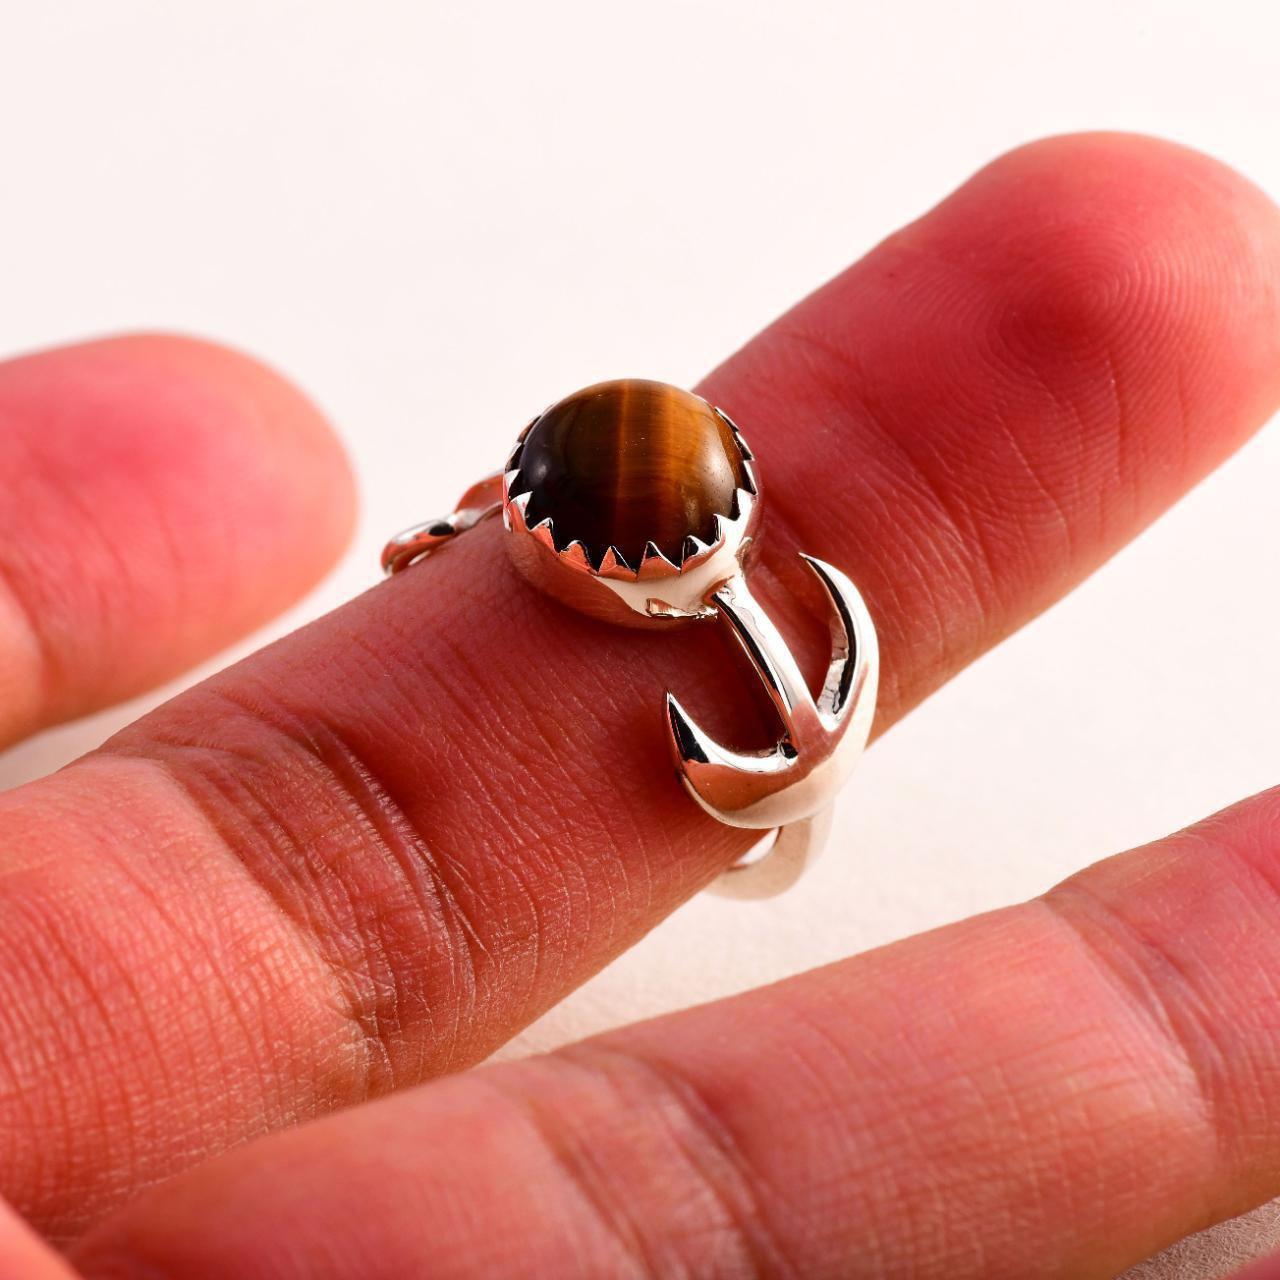 Product Image 4 - Sterling 925 Tigers Eye Ring

Size